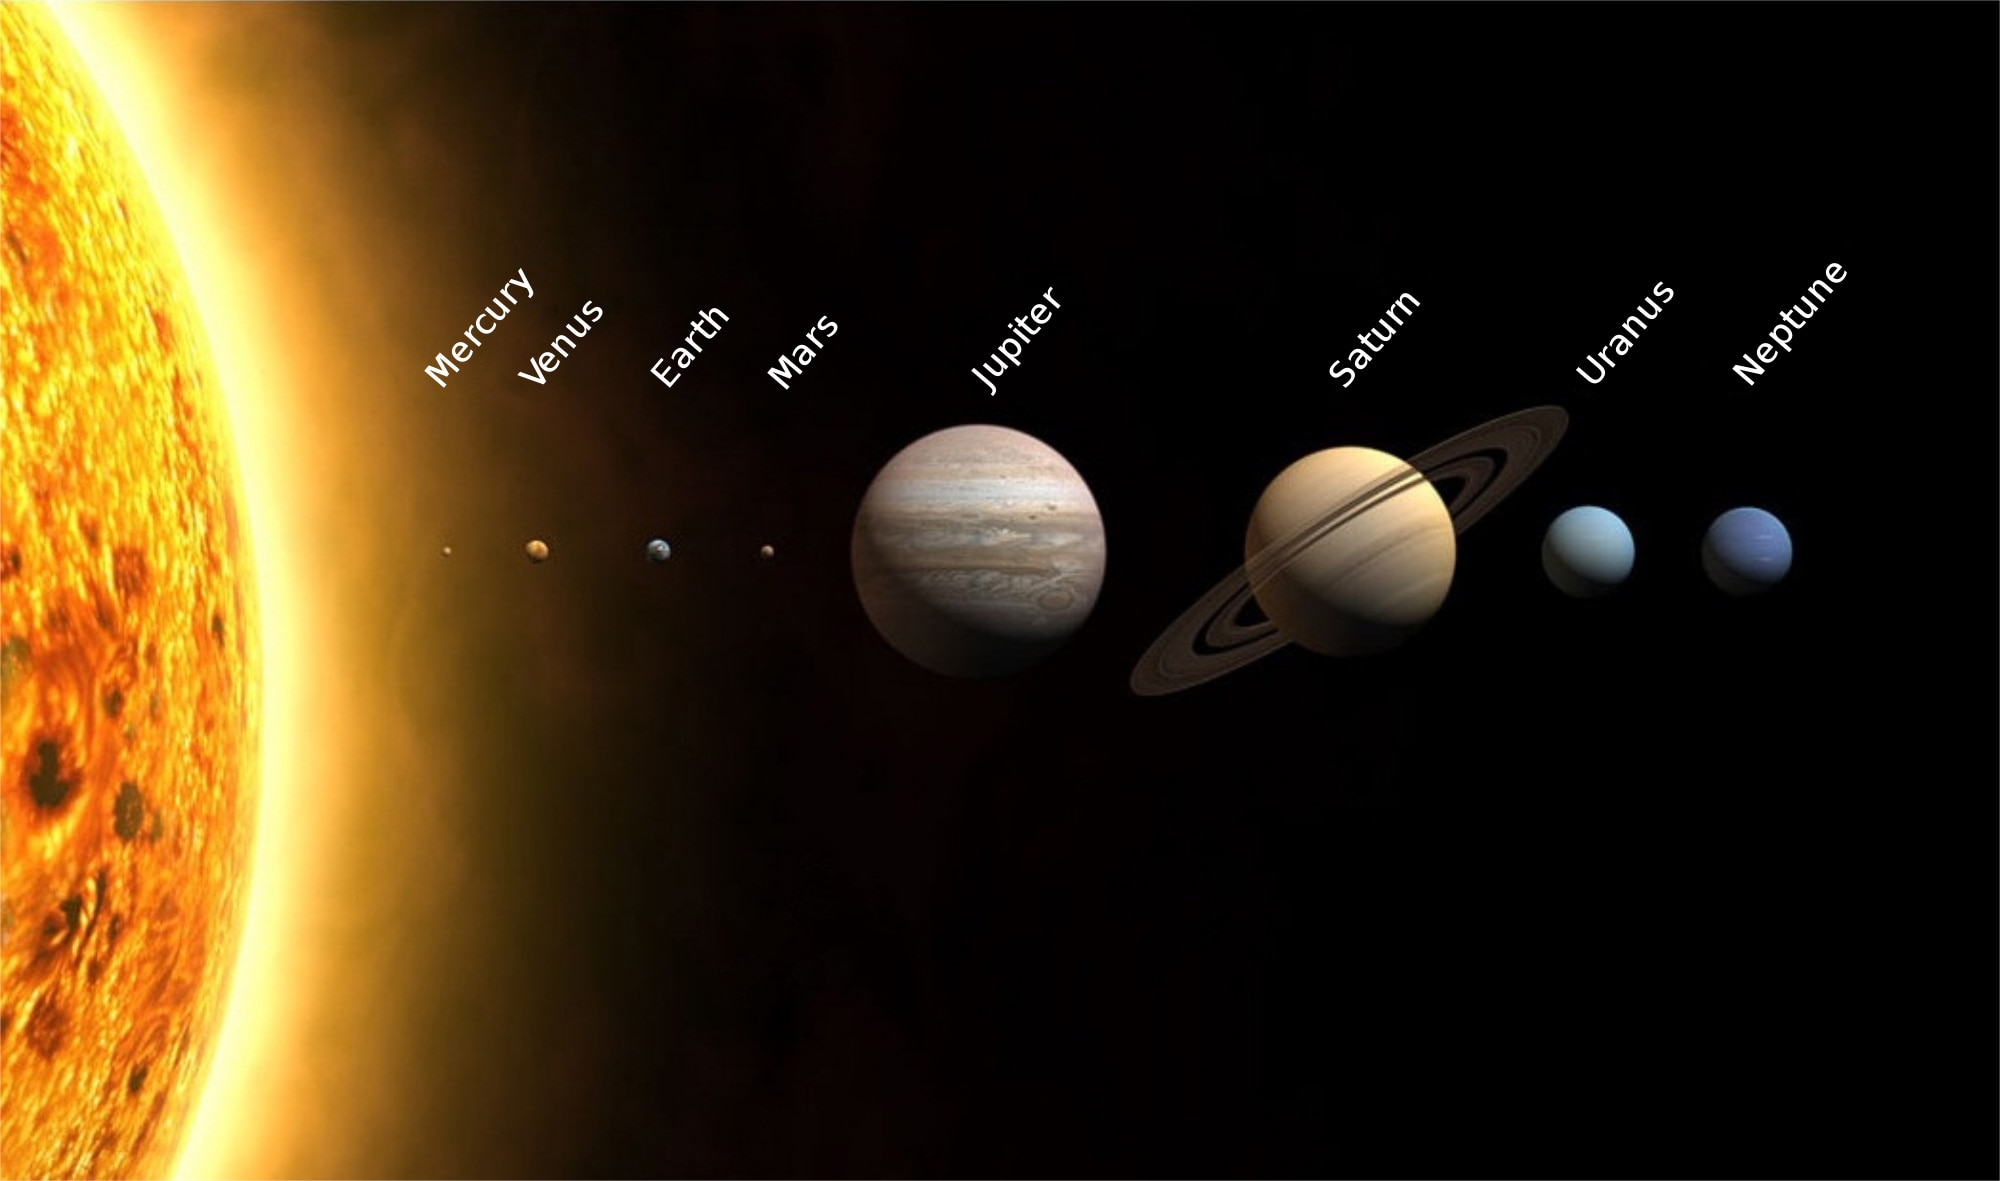 The solar system, with object sizes to scale, but not the distances. Credit: Wikipedia / WP / PlanetUser